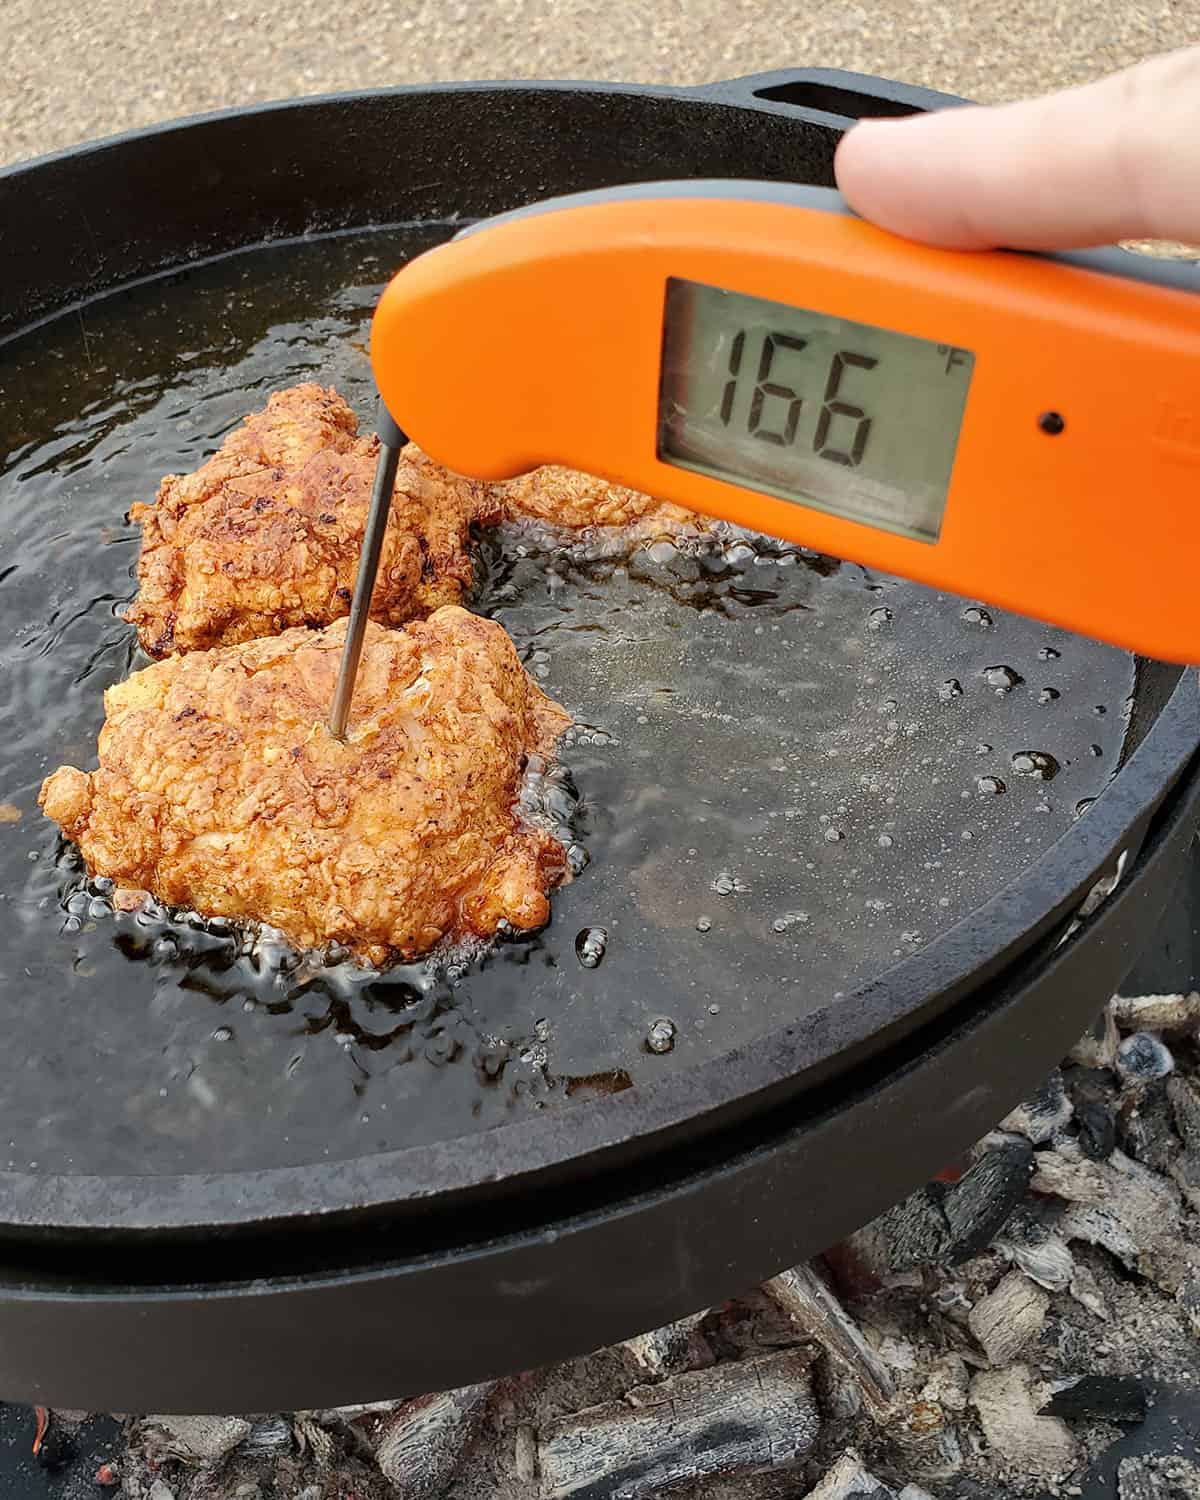 Instant read thermometer showing temperature of chicken is 166.